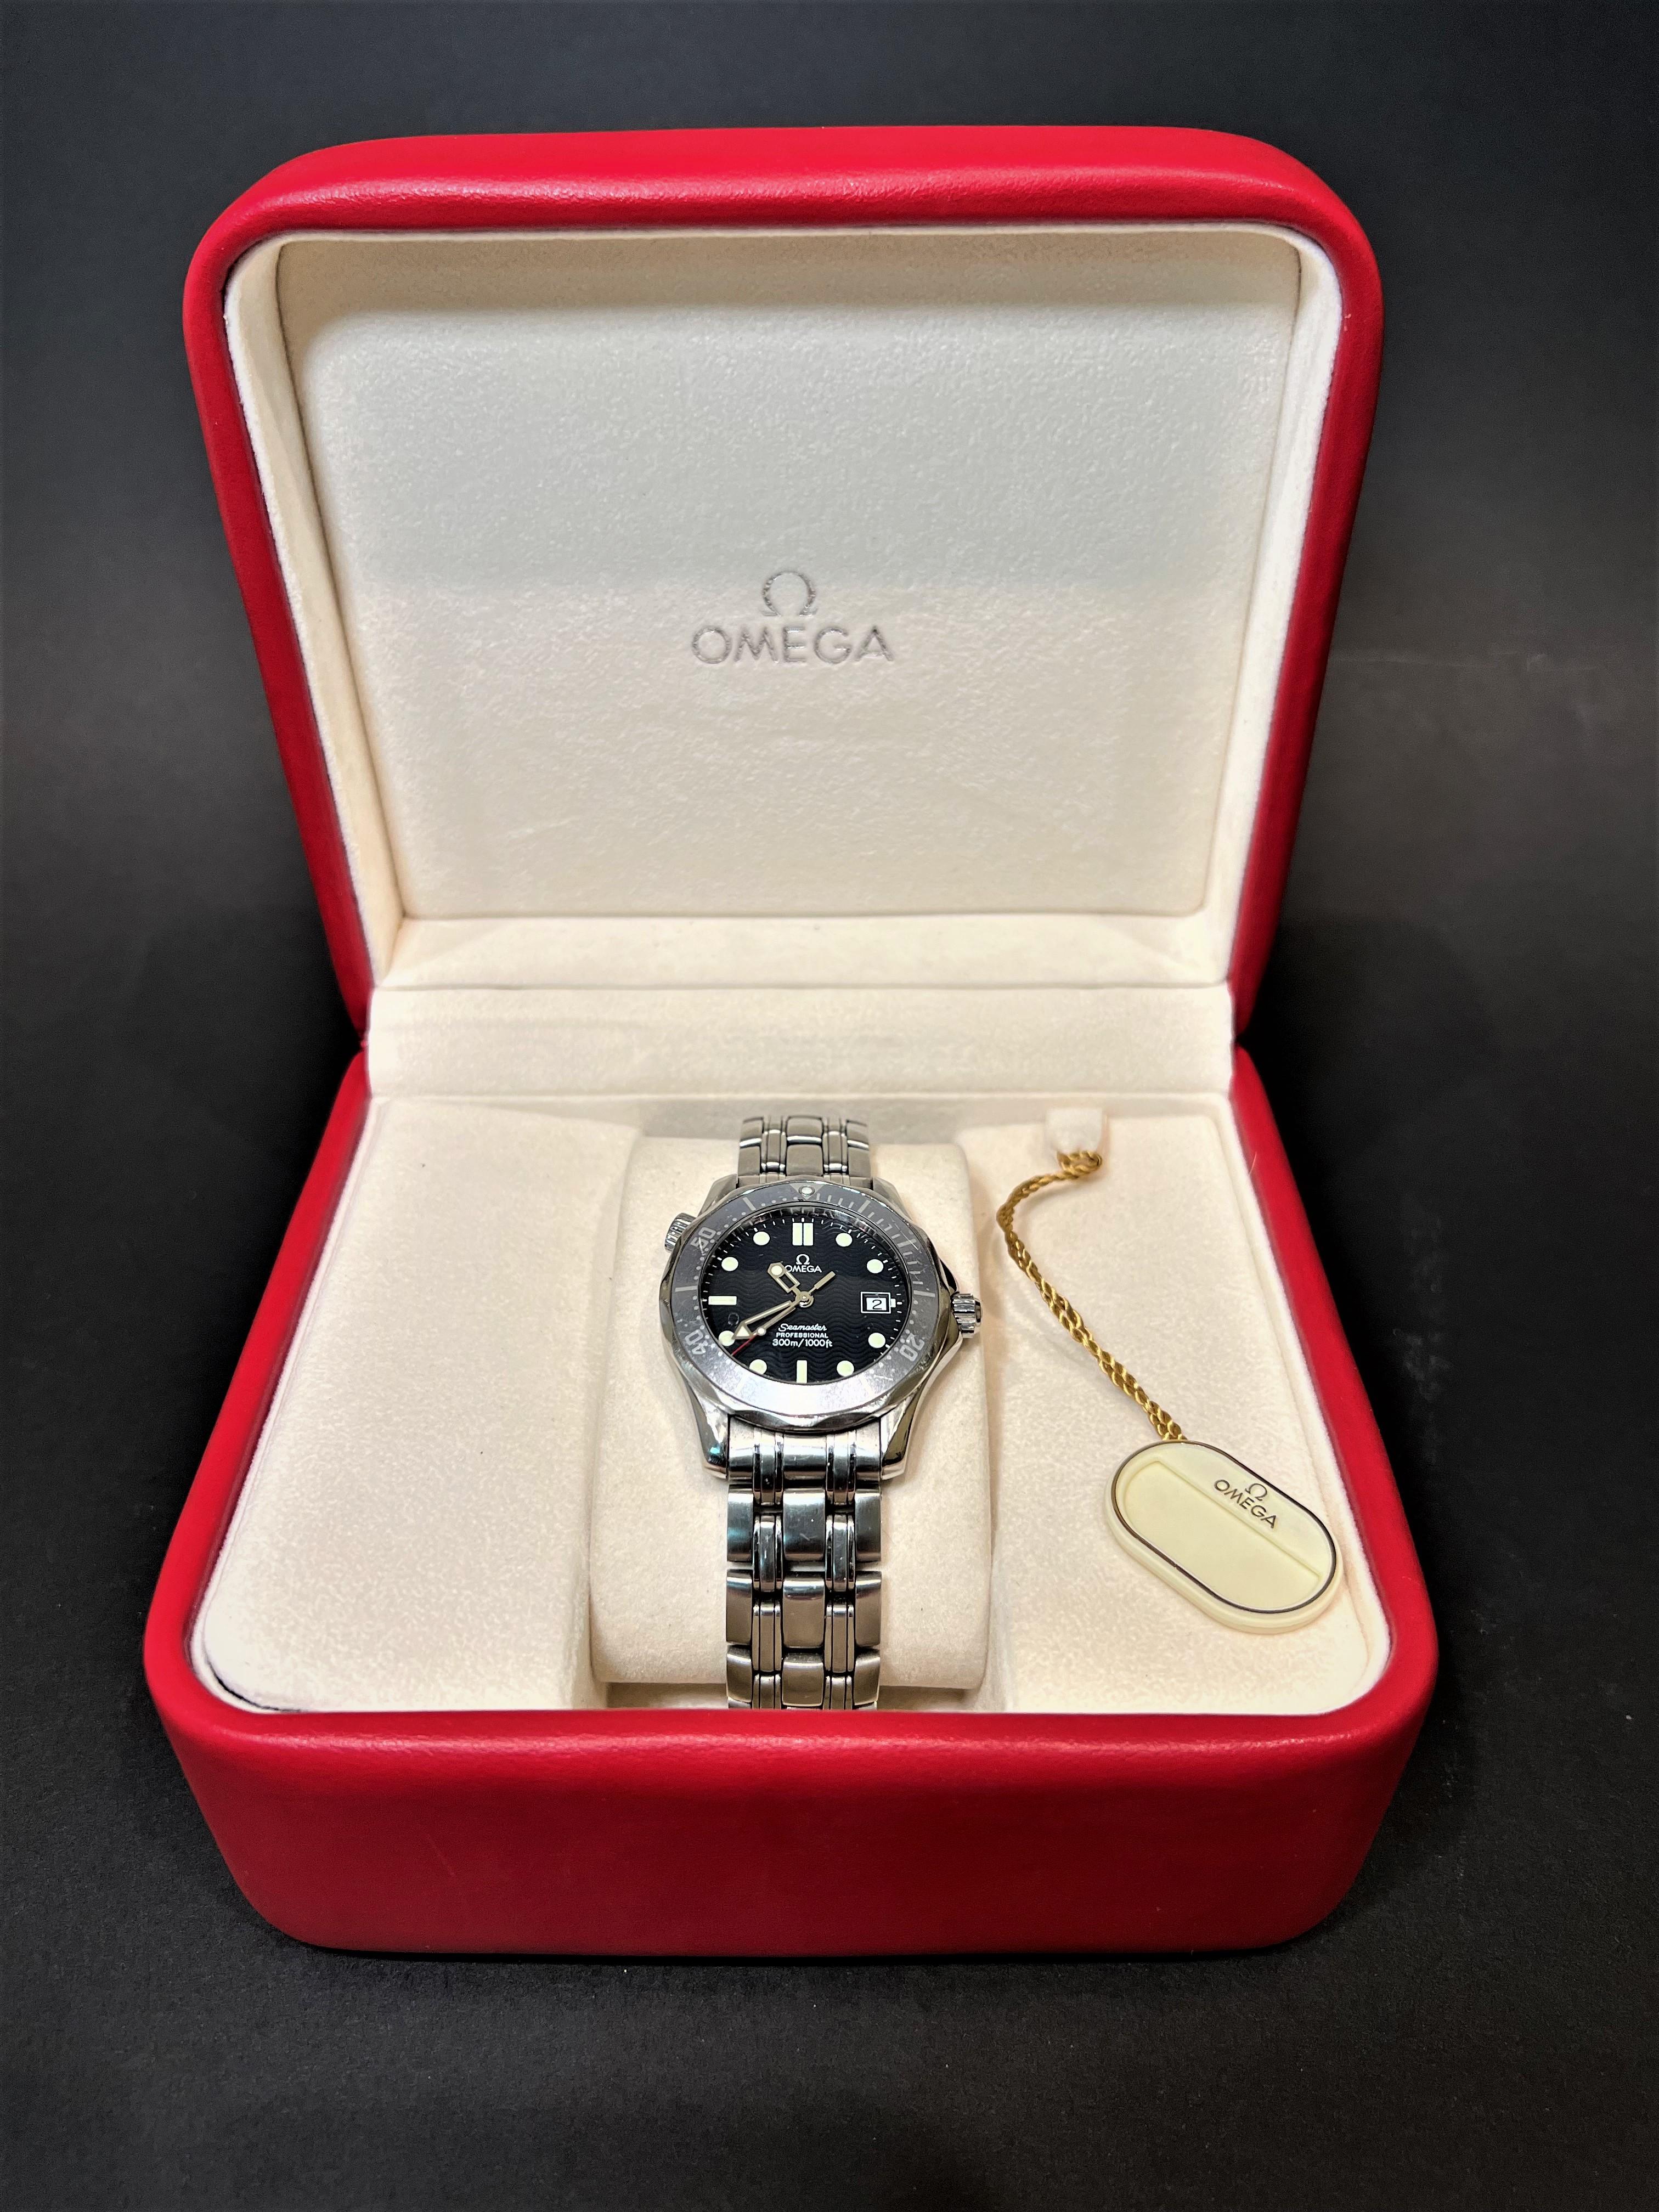 Omega Seamaster Professional Diver, 300 Meters Wristwatch For Sale 3